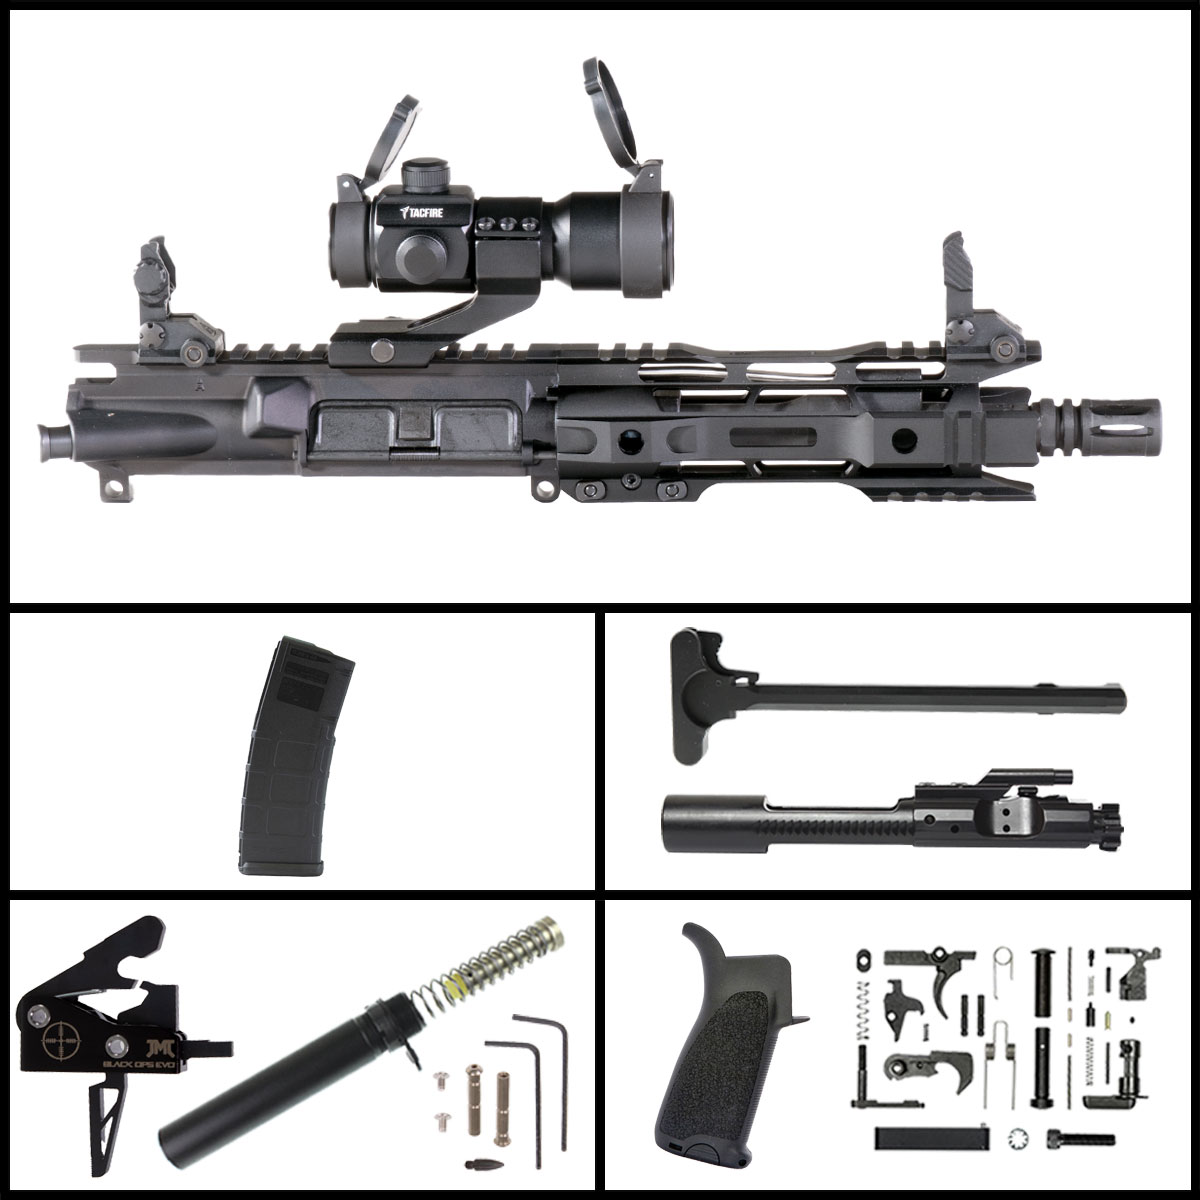 DD 'Here and Now' 7.5-inch AR-15 5.56 NATO Manganese Phosphate Rifle Full Build Kit